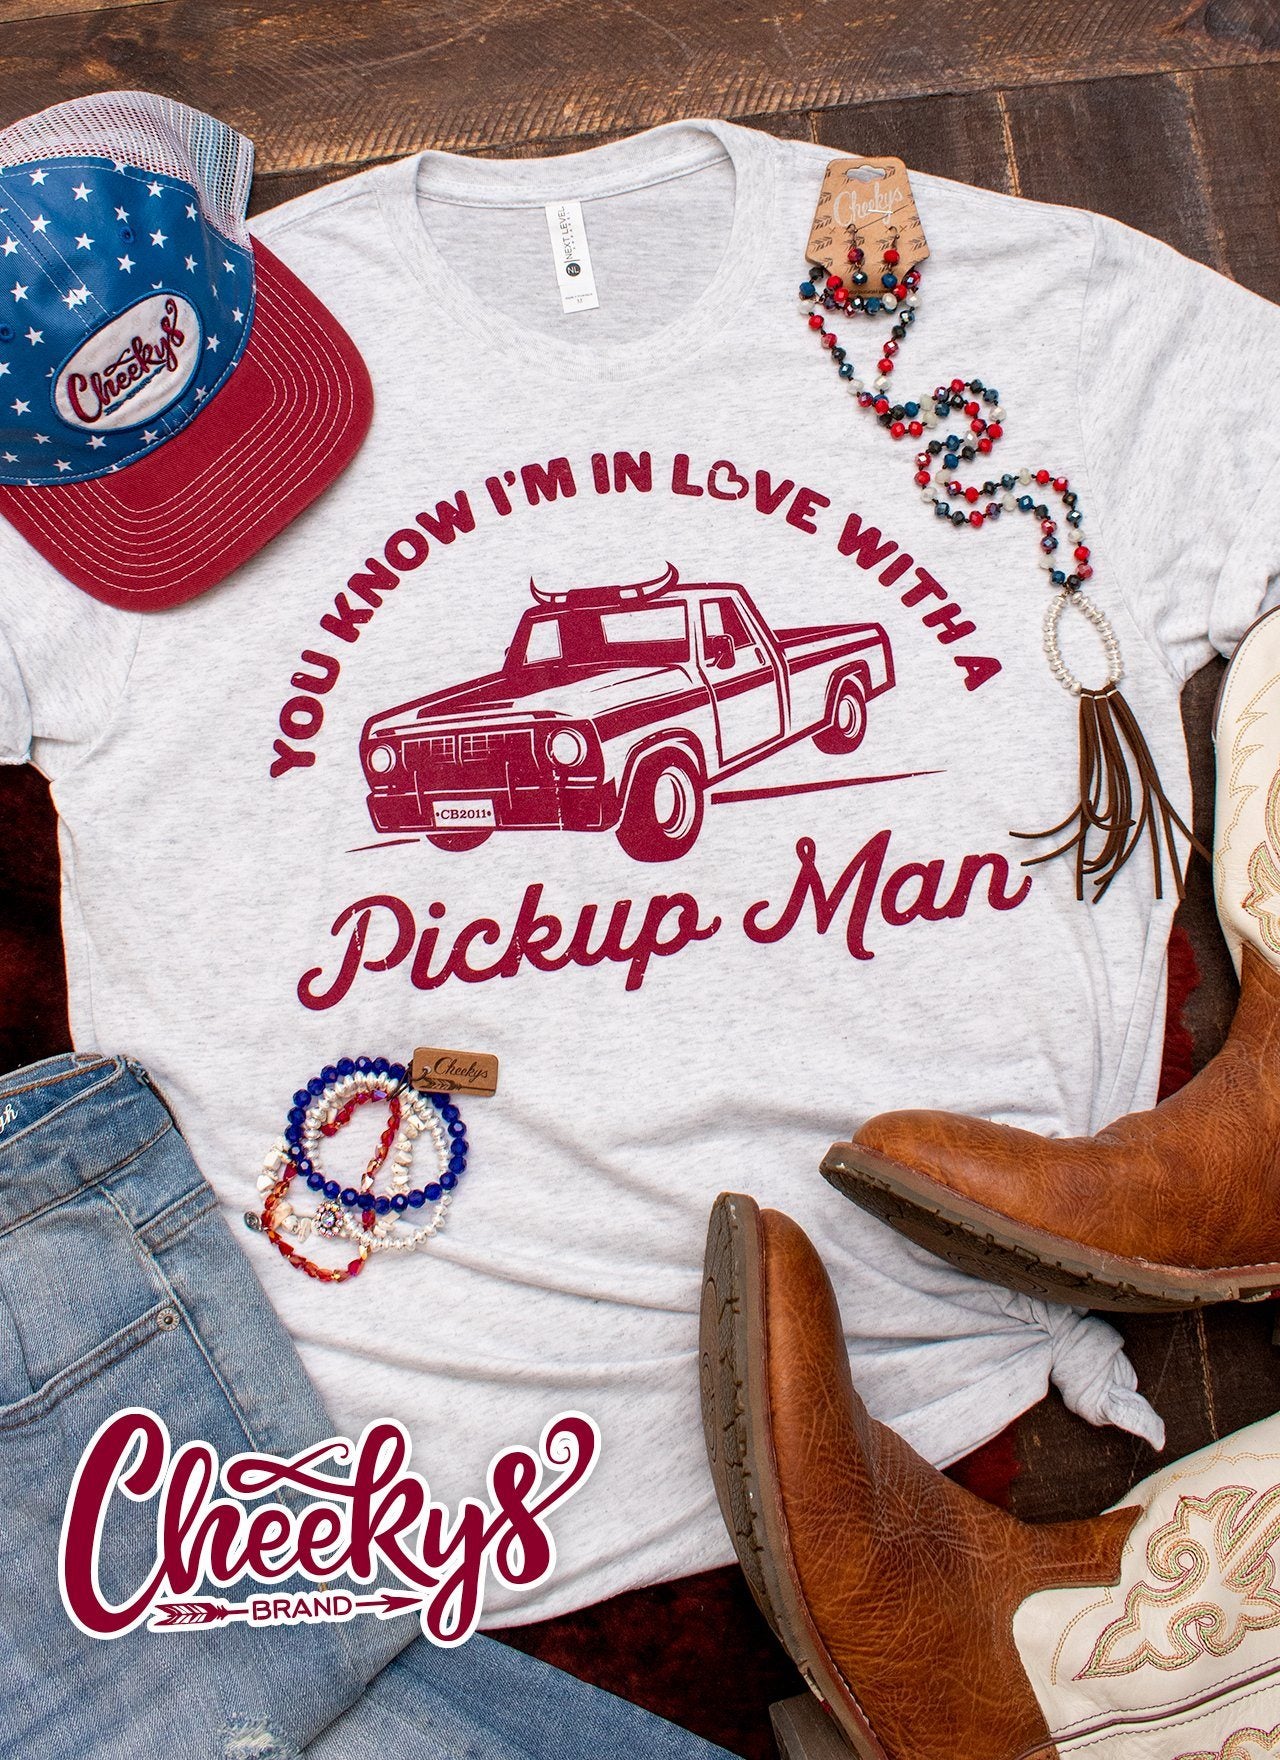 You Know I'm In Love With a Pickup Man Unisex Tee on Heather Caliche Cheekys Apparel 38 